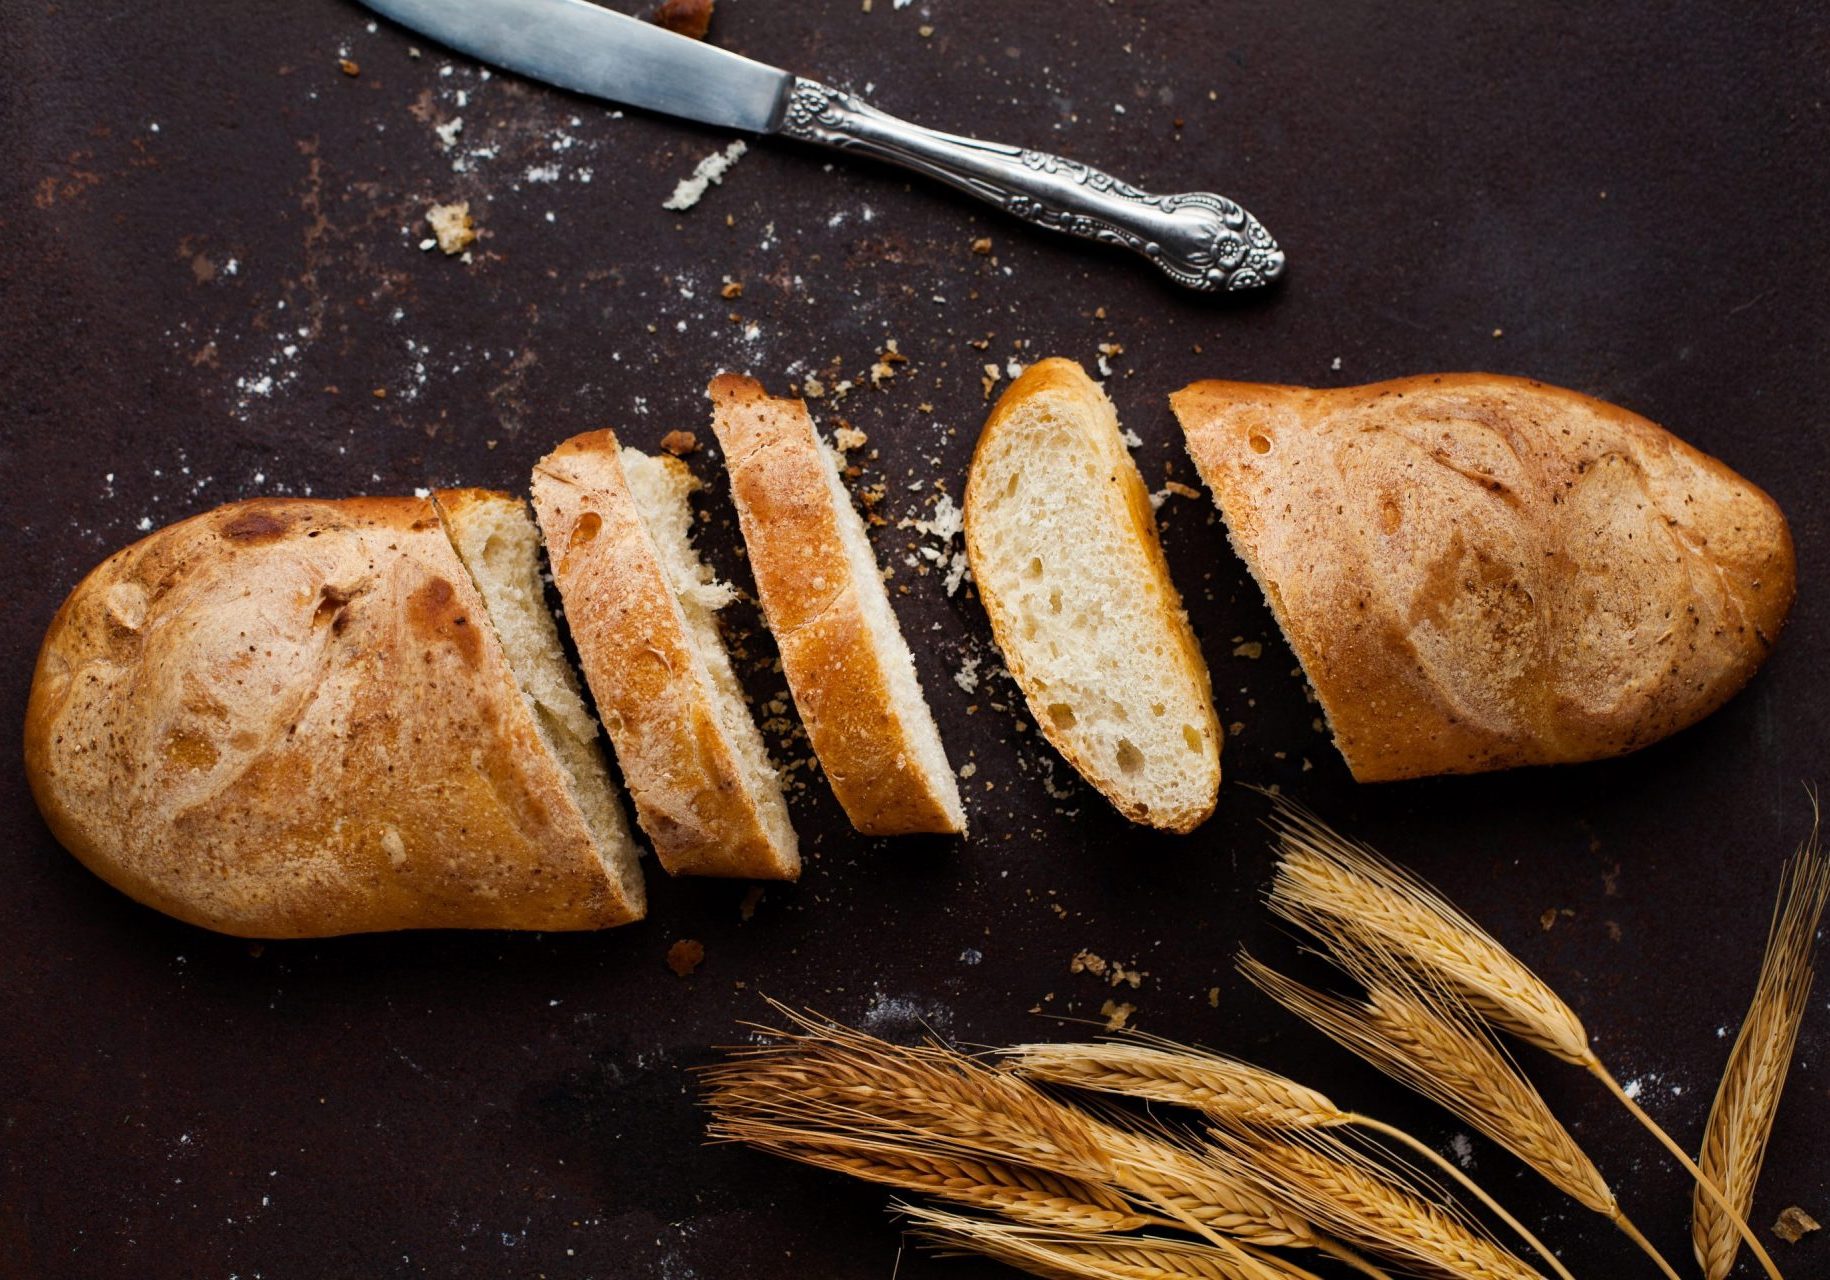 Baking Baguette with three slices and a knife lying on a dark background